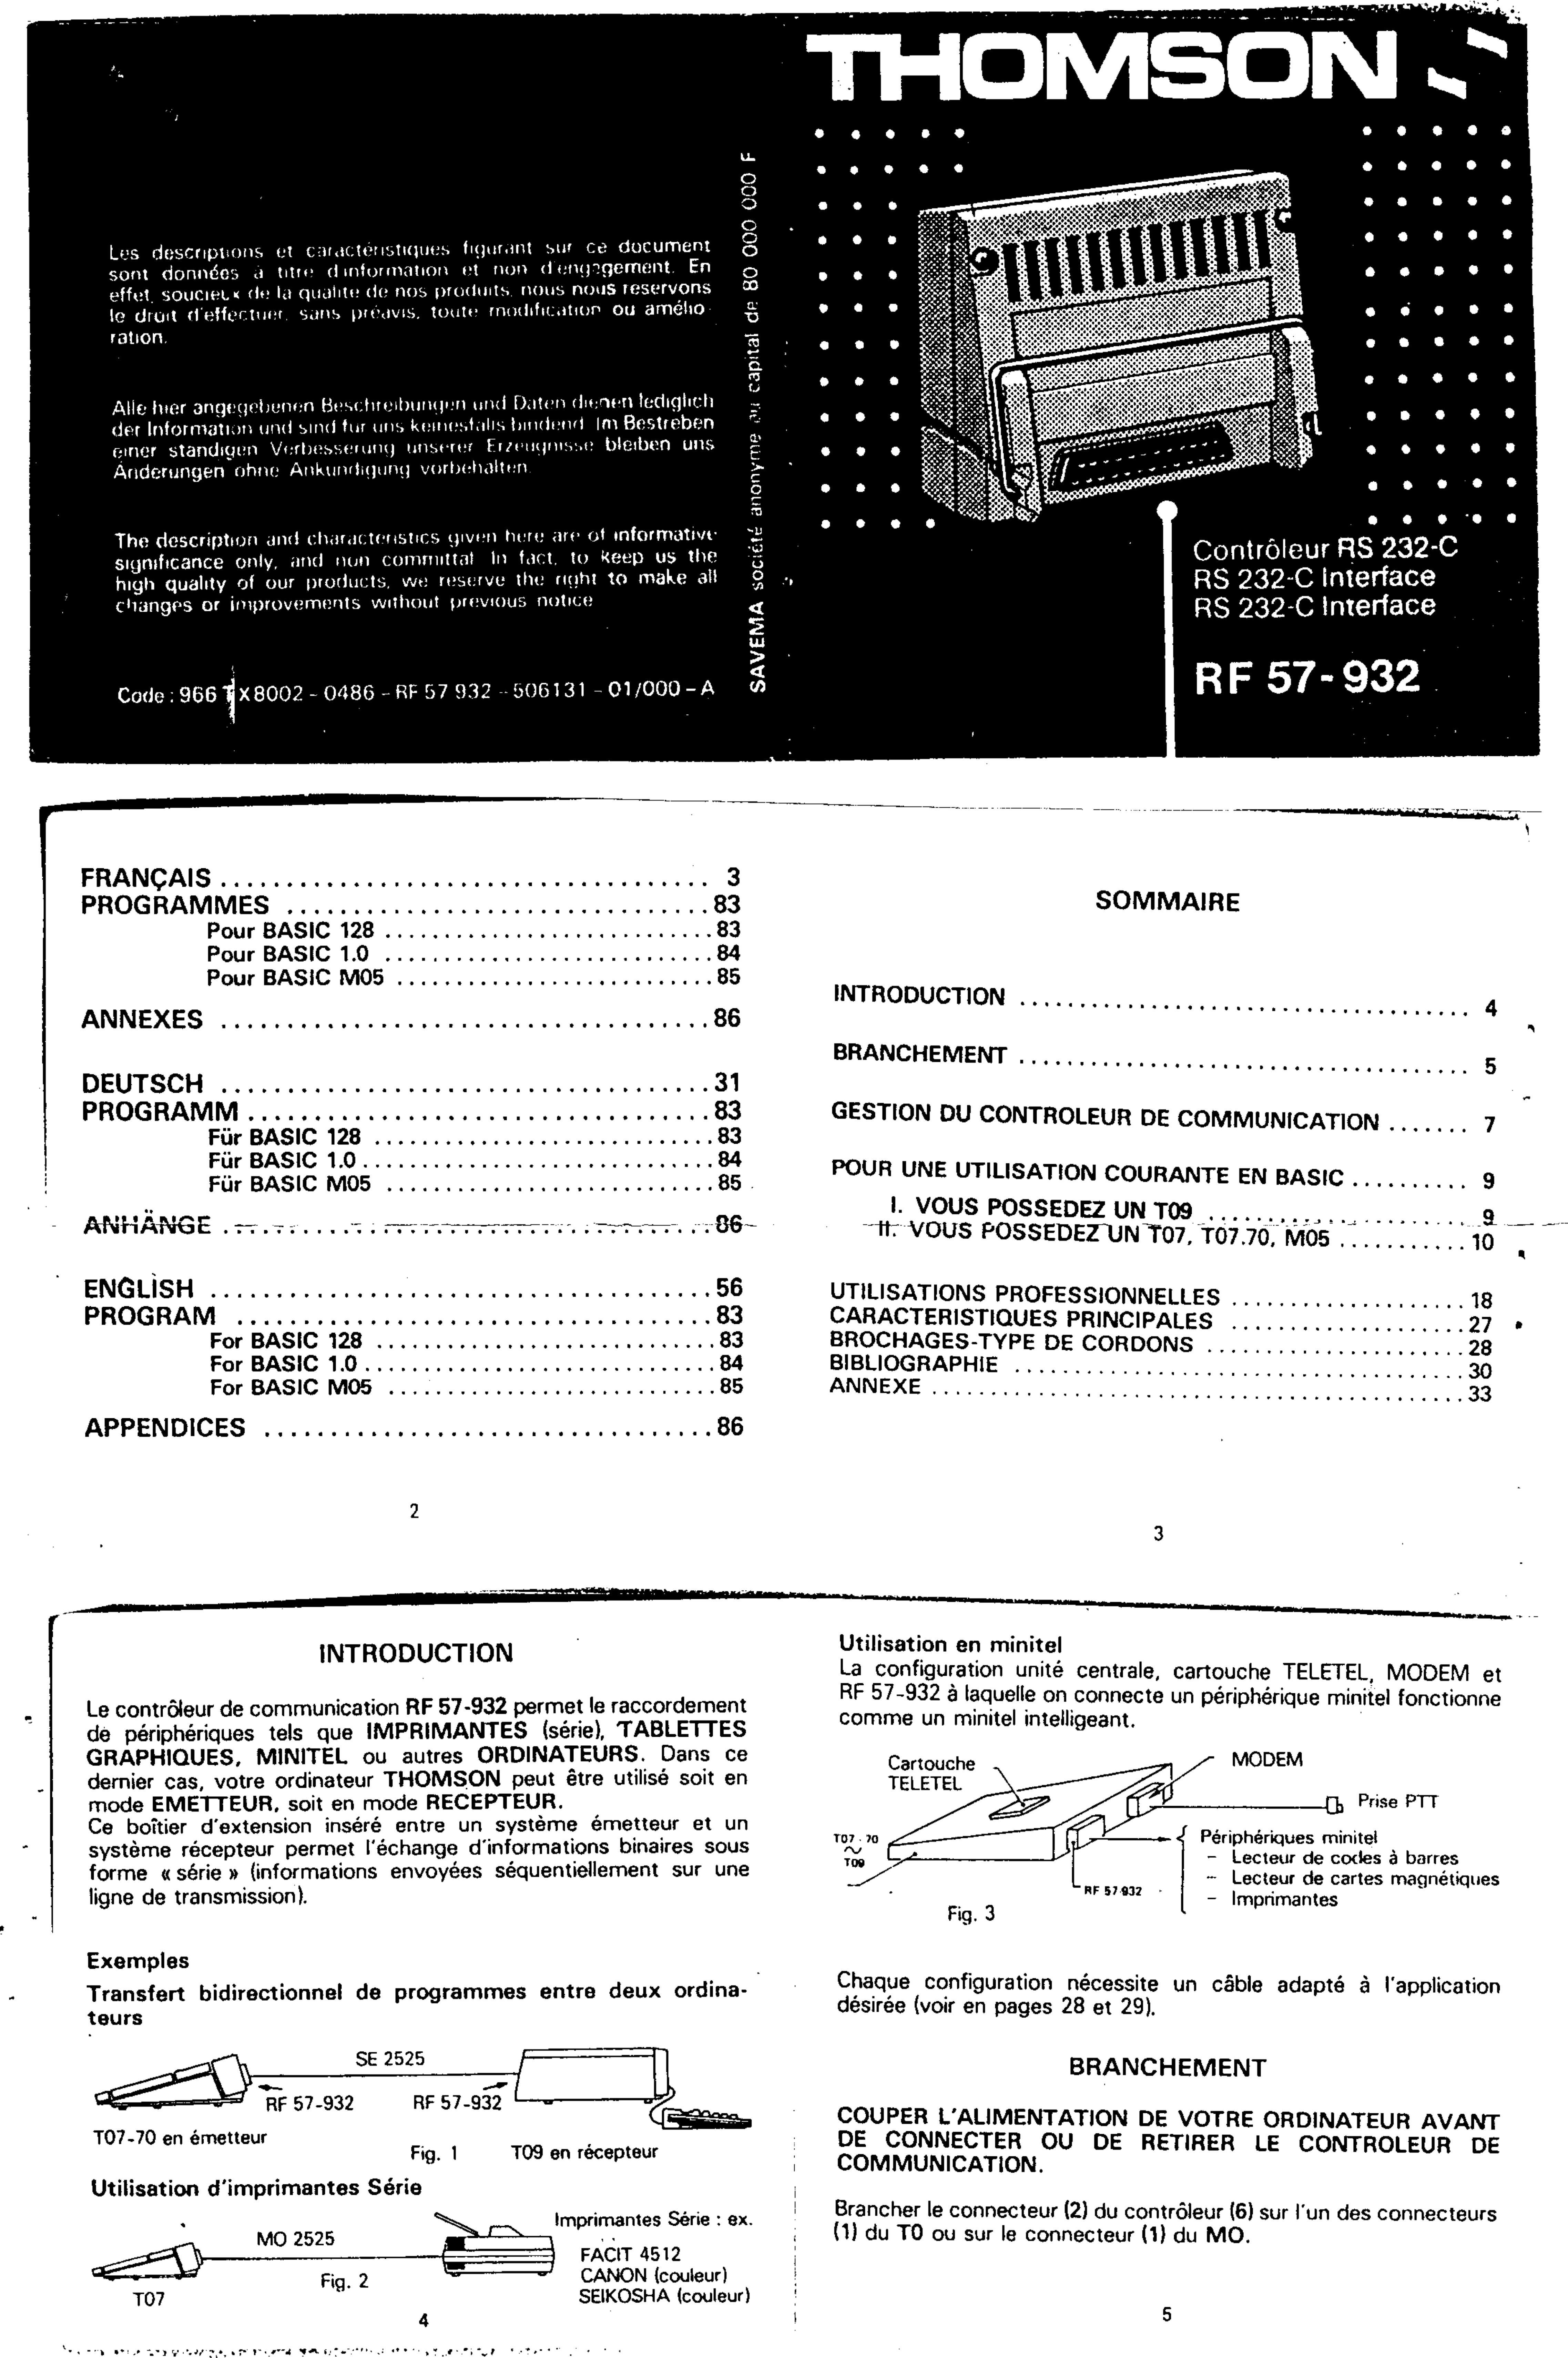 Page 1 of 7 - Controleur 57-932 RS-232 Rf57932-doc